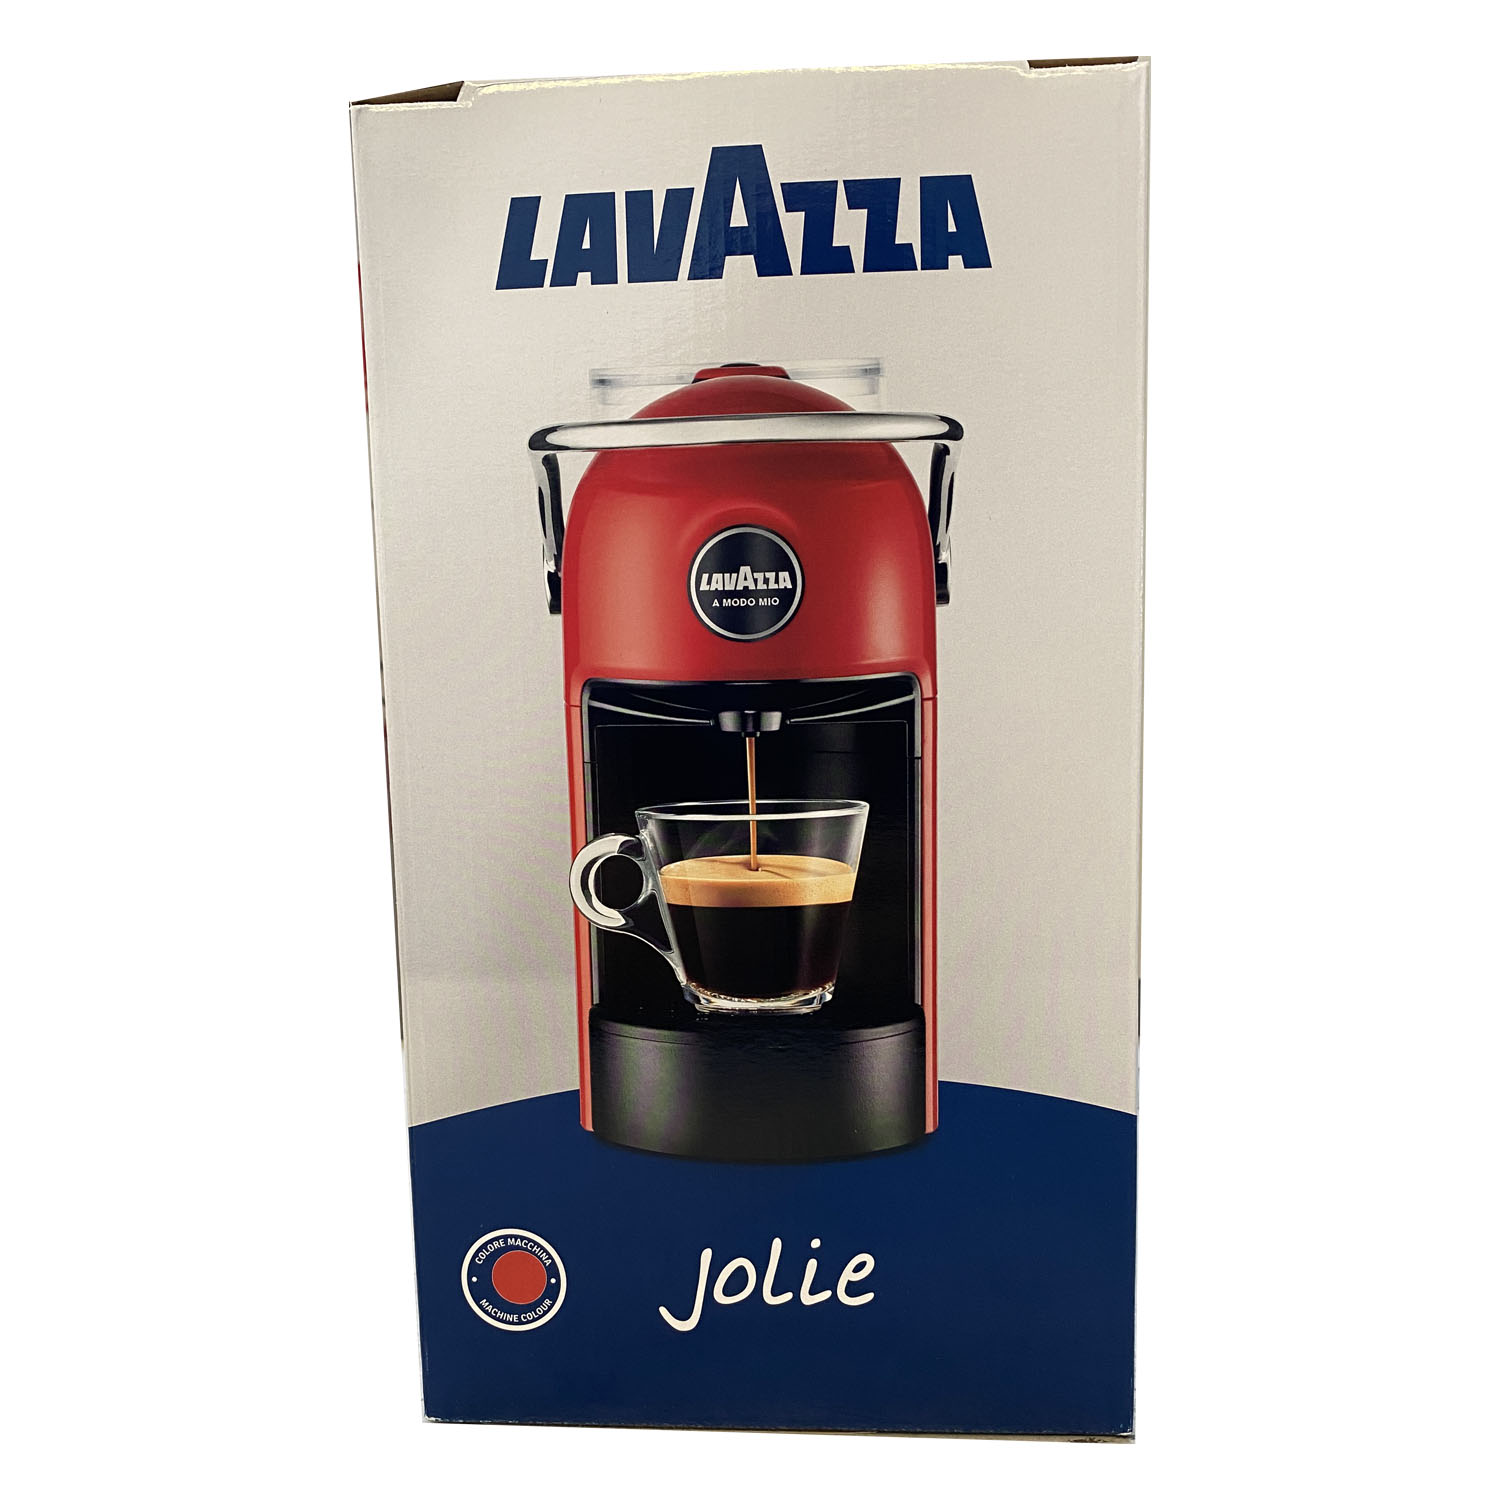 Lavazza Modo Mio Jolie Capsule Coffee Machine - Red – GED Outlet